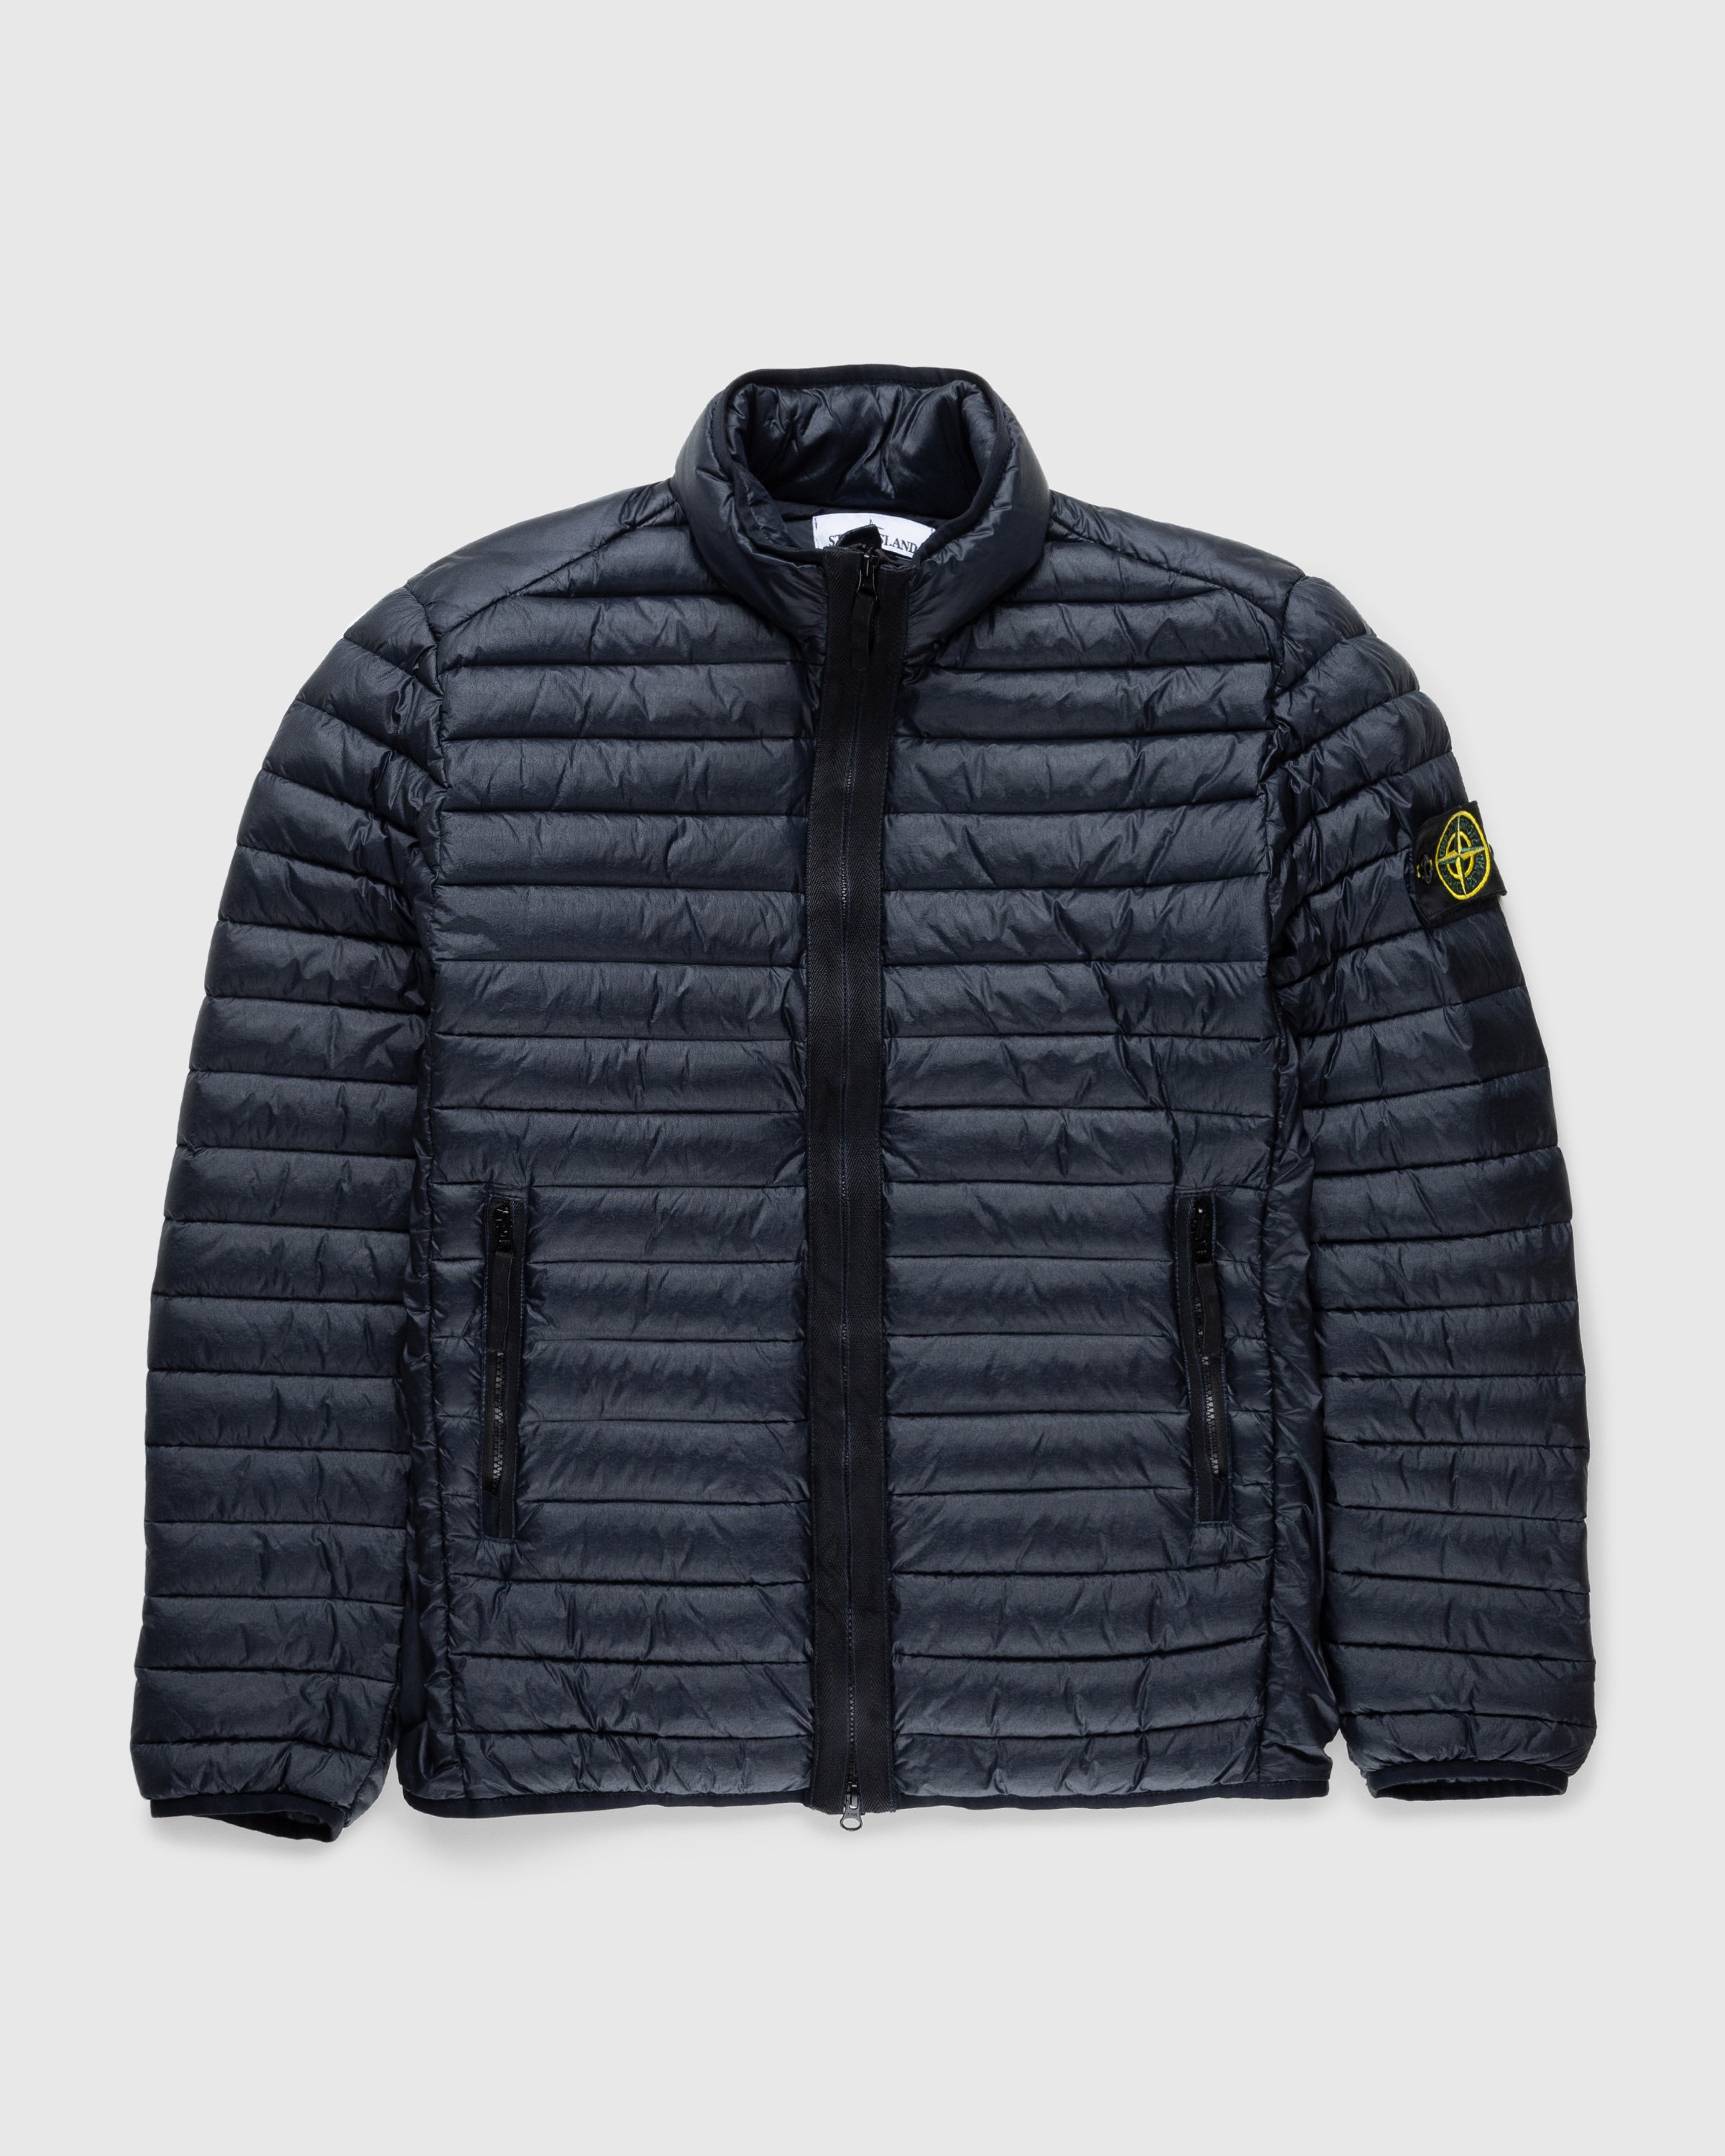 Stone Island - Packable Recycled Nylon Down Jacket Navy Blue - Clothing - Blue - Image 1